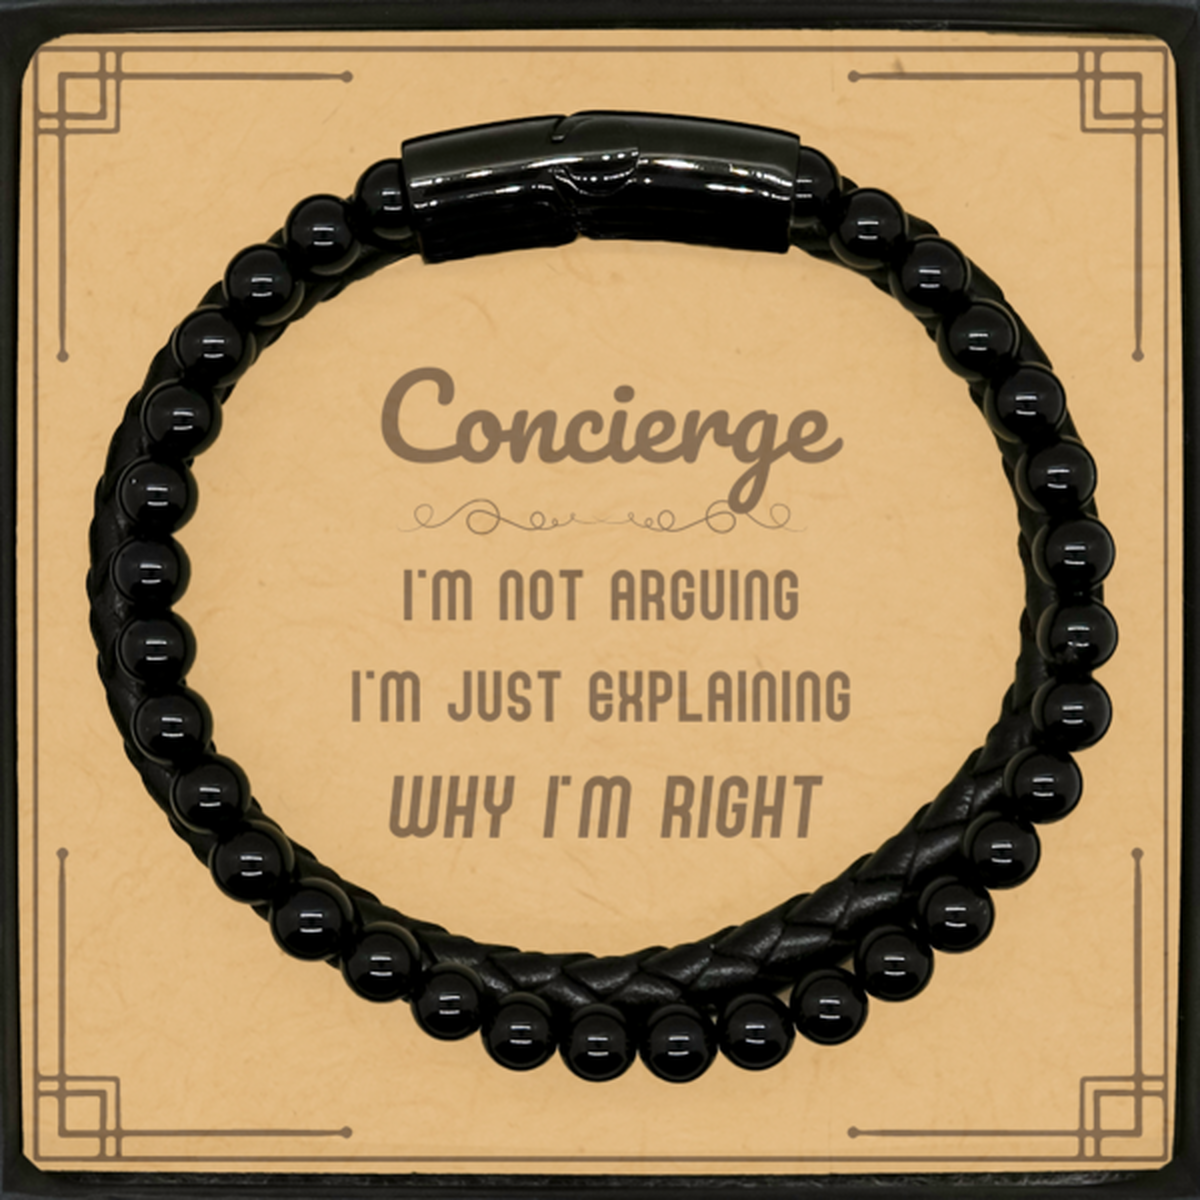 Concierge I'm not Arguing. I'm Just Explaining Why I'm RIGHT Stone Leather Bracelets, Funny Saying Quote Concierge Gifts For Concierge Message Card Graduation Birthday Christmas Gifts for Men Women Coworker